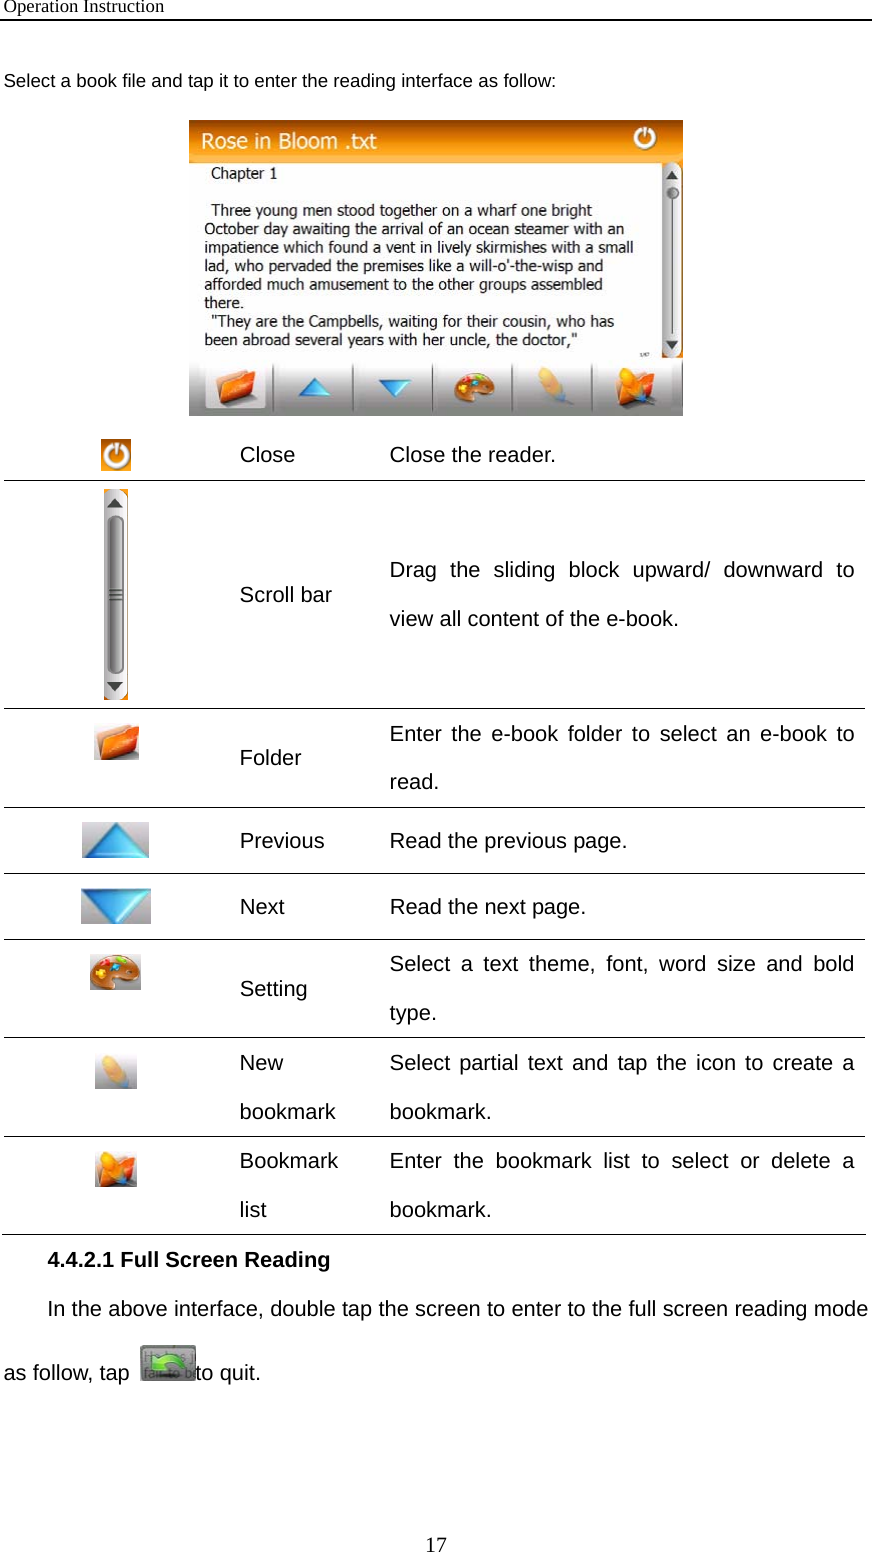 Operation Instruction 17 Select a book file and tap it to enter the reading interface as follow:   Close  Close the reader.  Scroll bar  Drag the sliding block upward/ downward to view all content of the e-book.  Folder  Enter the e-book folder to select an e-book to read.  Previous  Read the previous page.  Next  Read the next page.  Setting  Select a text theme, font, word size and bold type.  New bookmark Select partial text and tap the icon to create a bookmark.  Bookmark list Enter the bookmark list to select or delete a bookmark. 4.4.2.1 Full Screen Reading In the above interface, double tap the screen to enter to the full screen reading mode as follow, tap  to quit. 